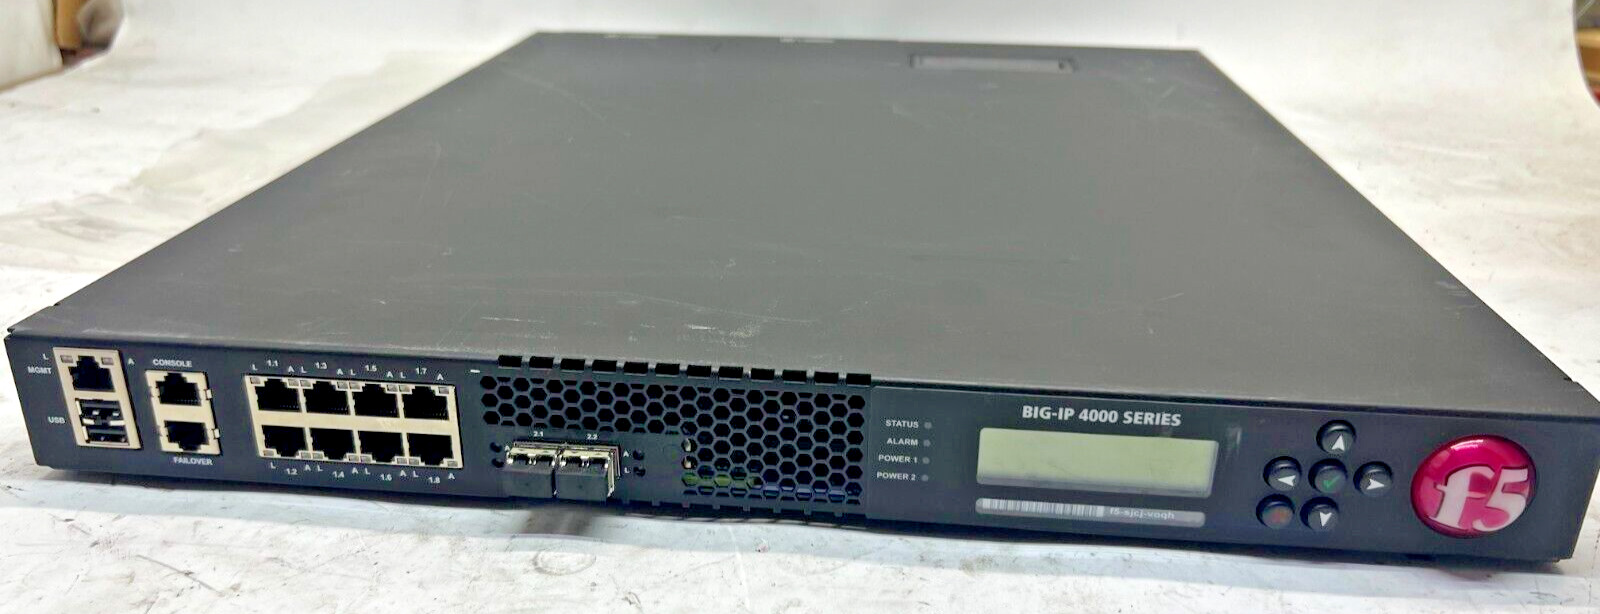 F5 NETWORKS BIG-IP I4000 SERIES LOCAL TRAFFIC MANAGER T5-C16